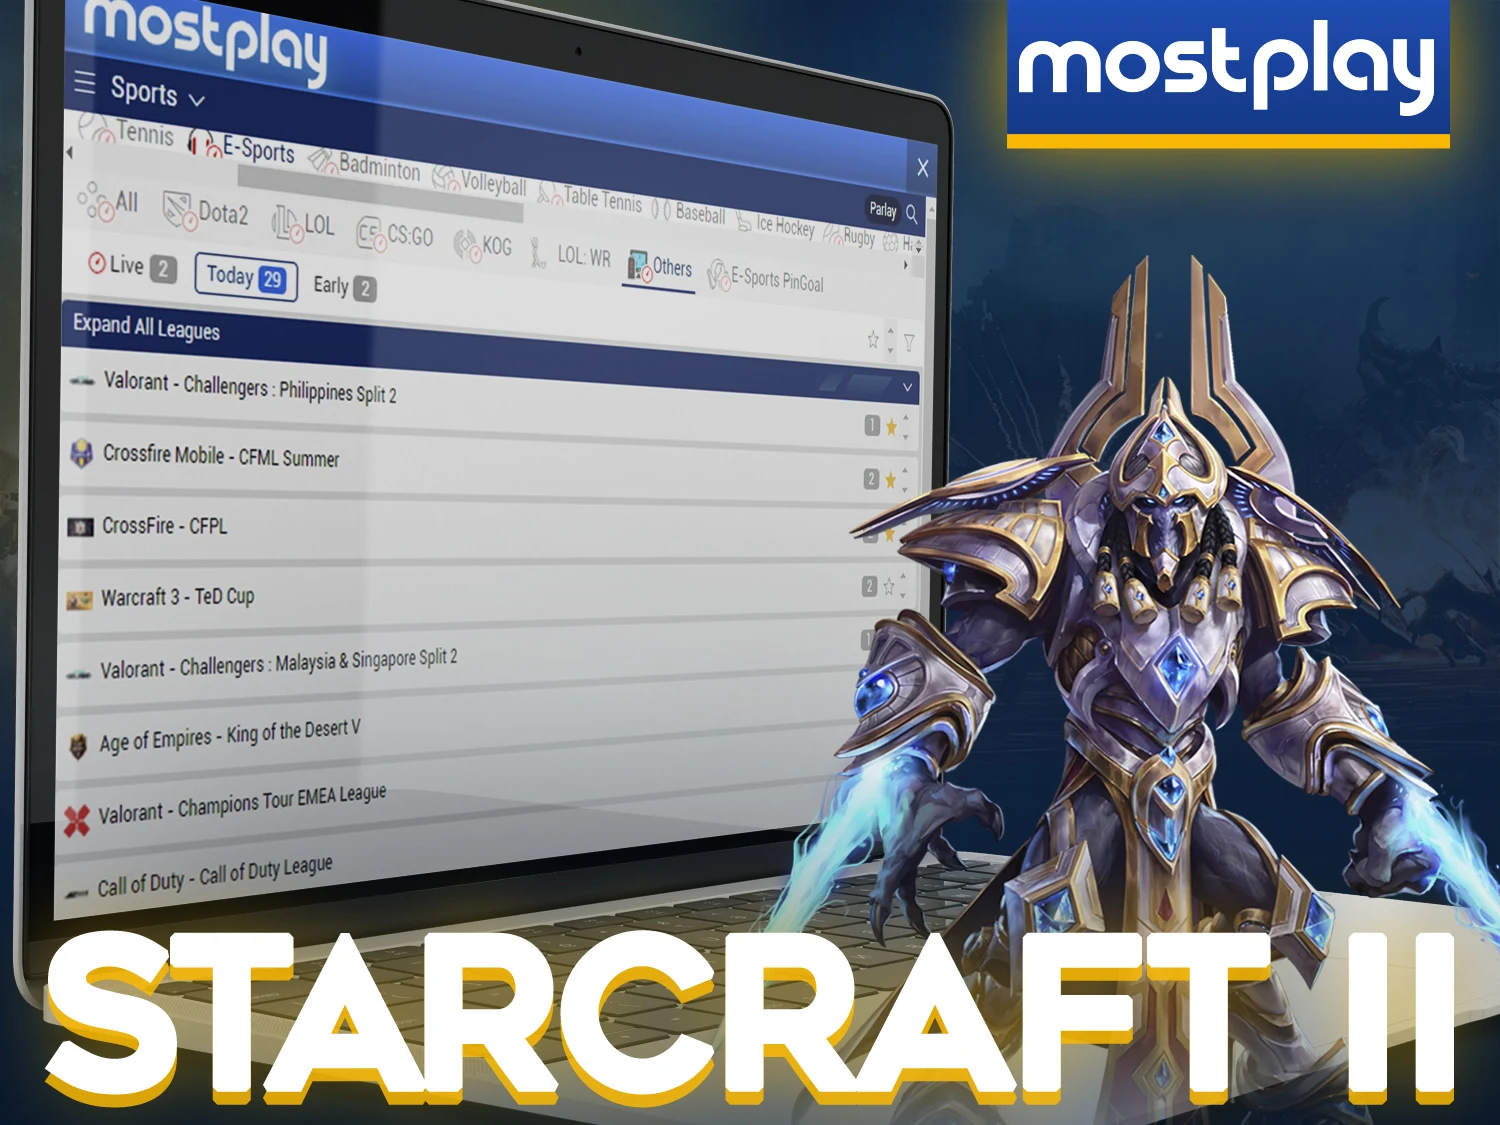 Bet on the best Starcraft 2 matches at the Mostplay.